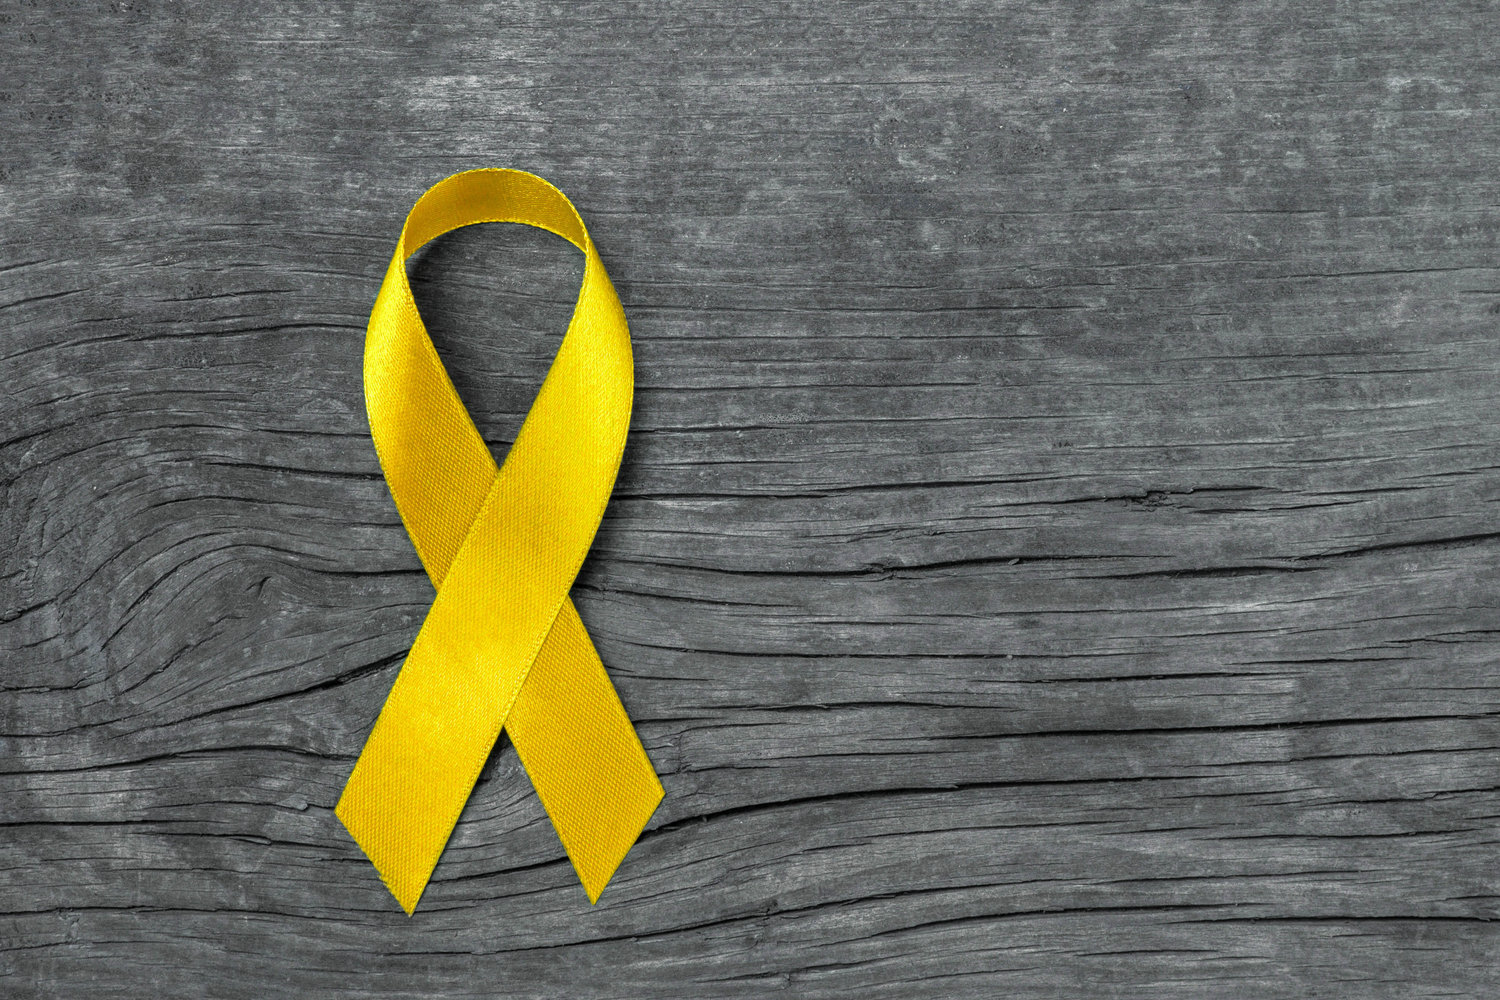 The yellow ribbon represents suicide awareness and prevention and survivors.